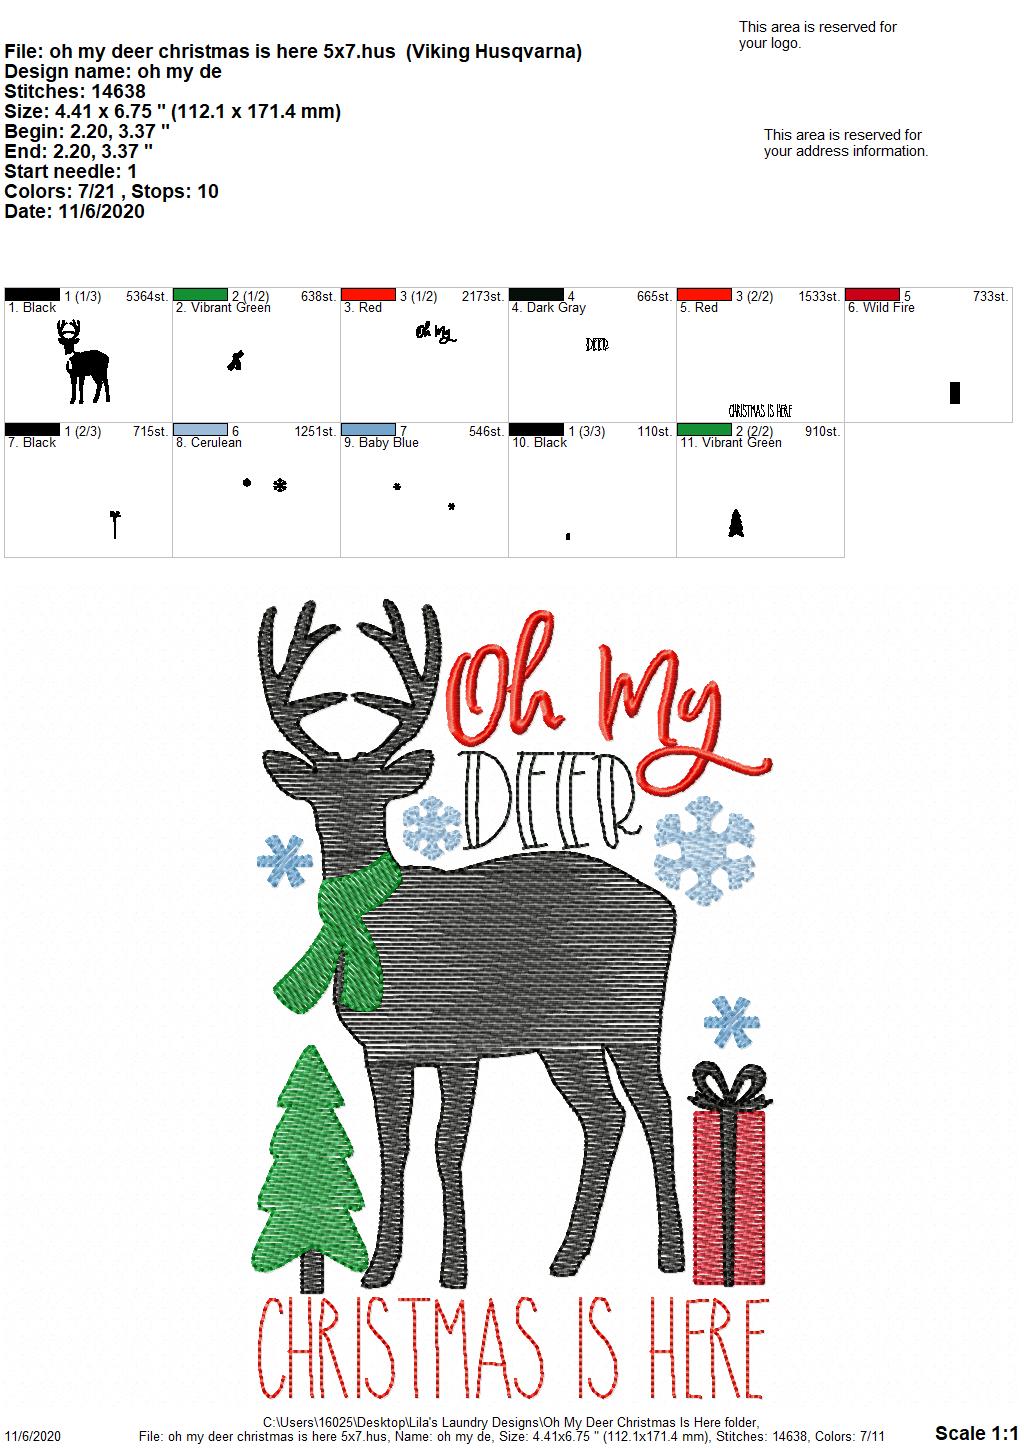 Oh My Deer Christmas Is Here - 2 Sizes - Digital Embroidery Design